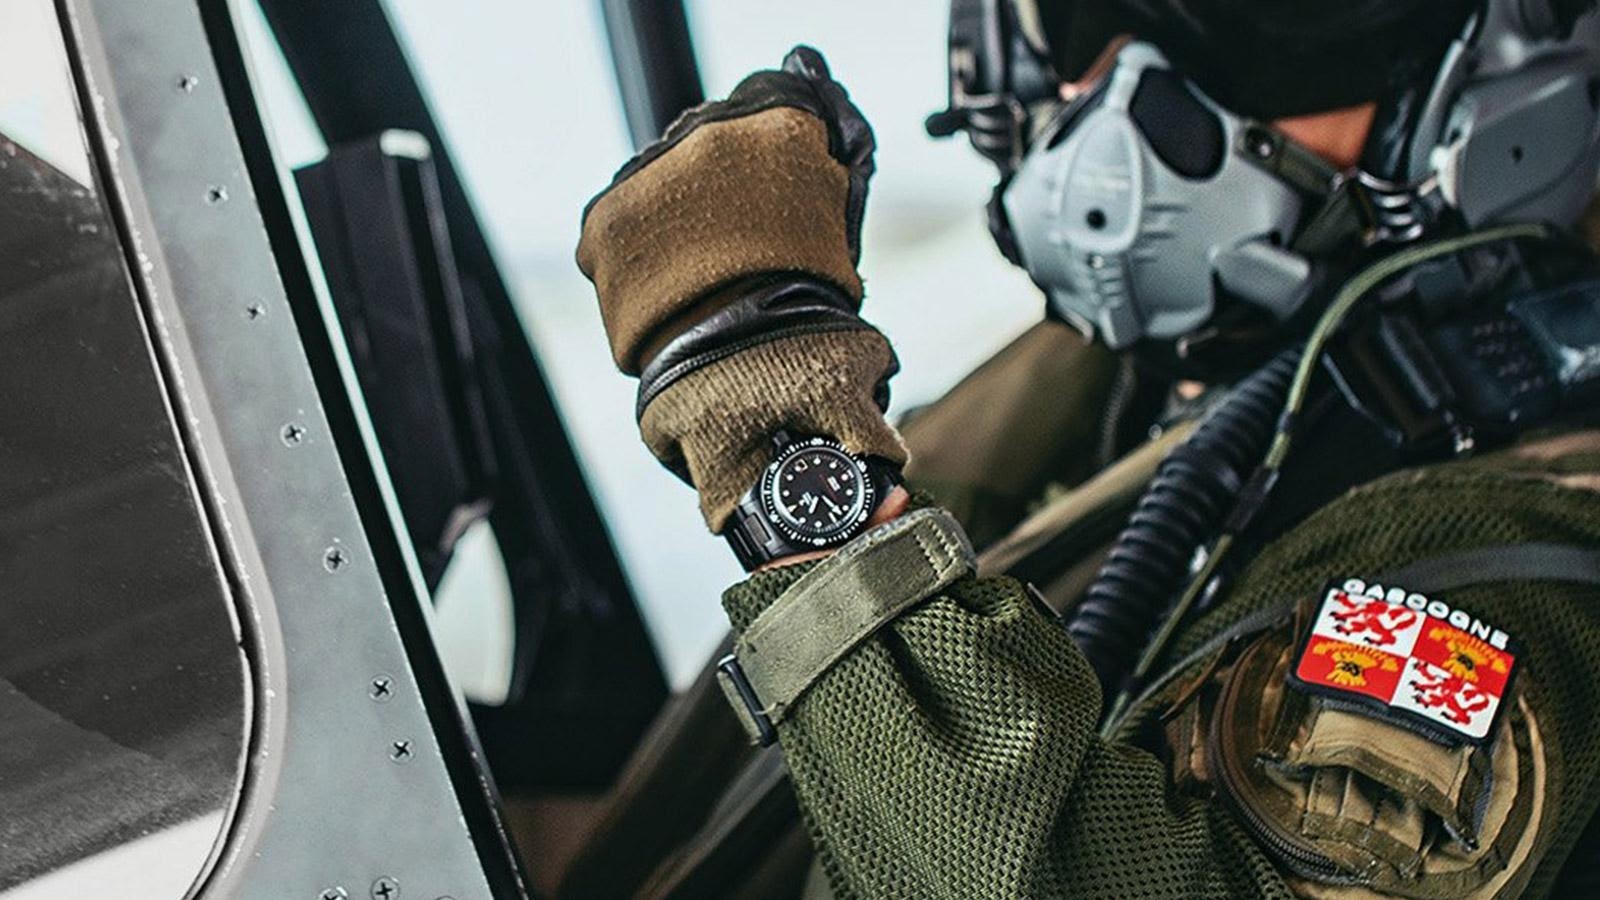 The official watch of the French Air Force is available to the general public